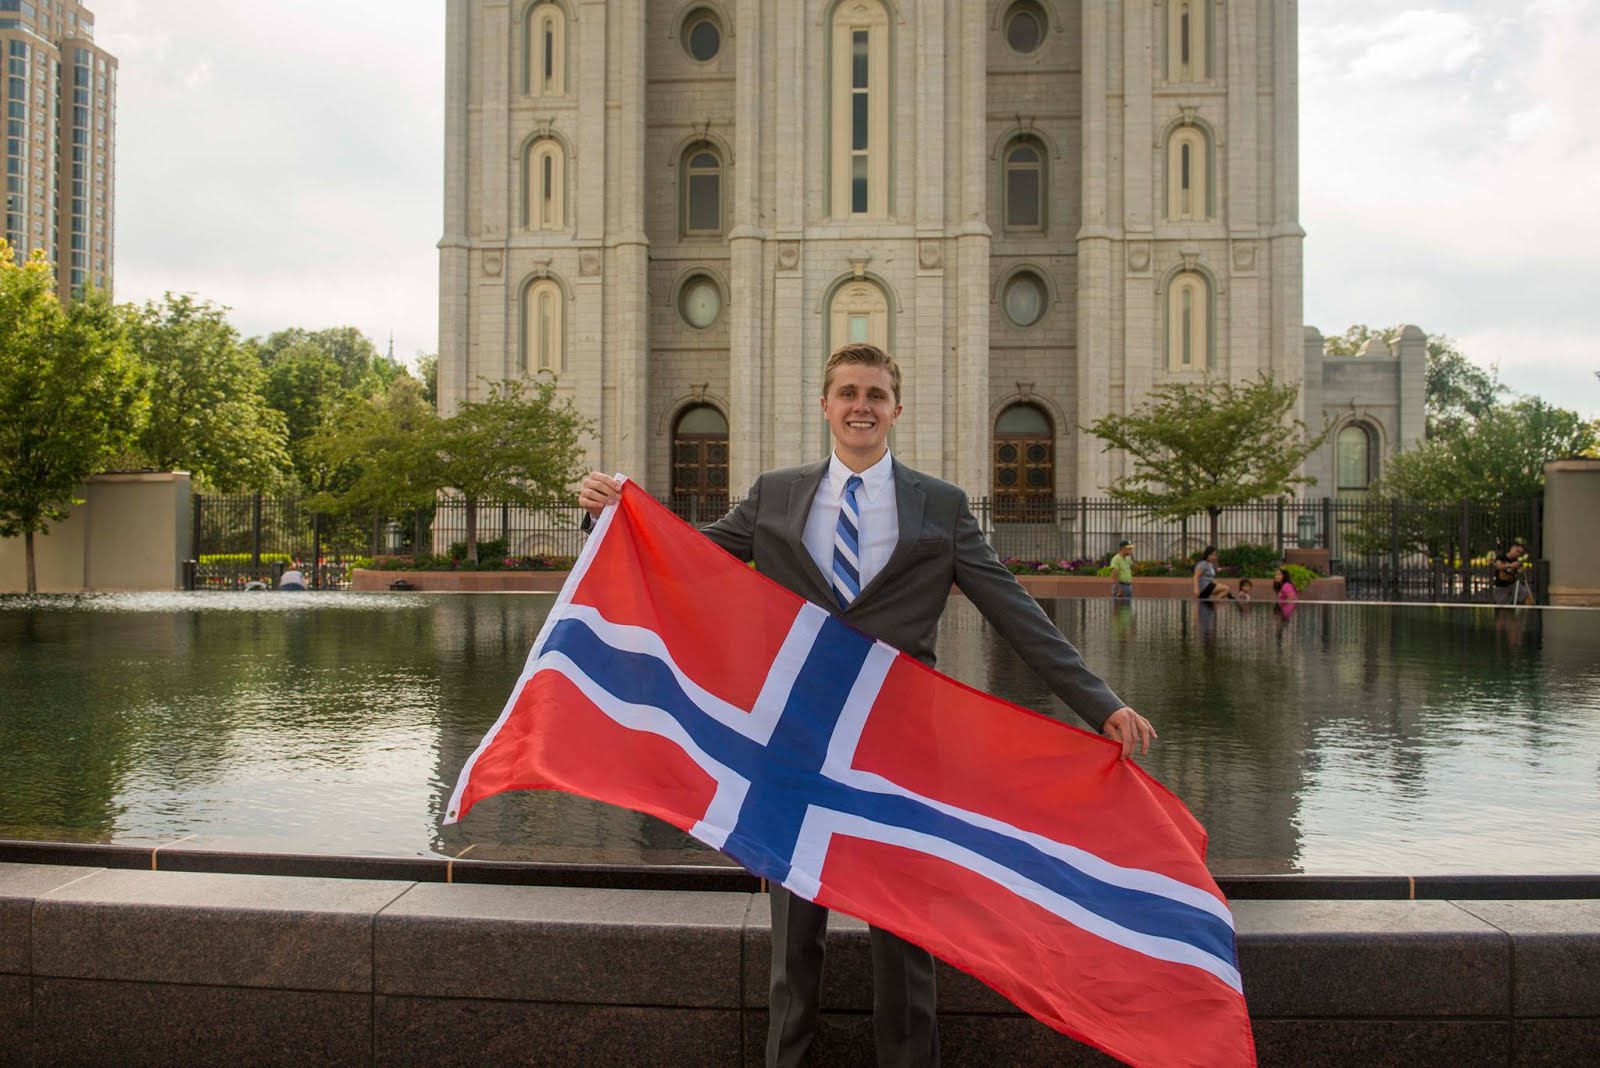 Oslo Norway Mission, Called to Serve